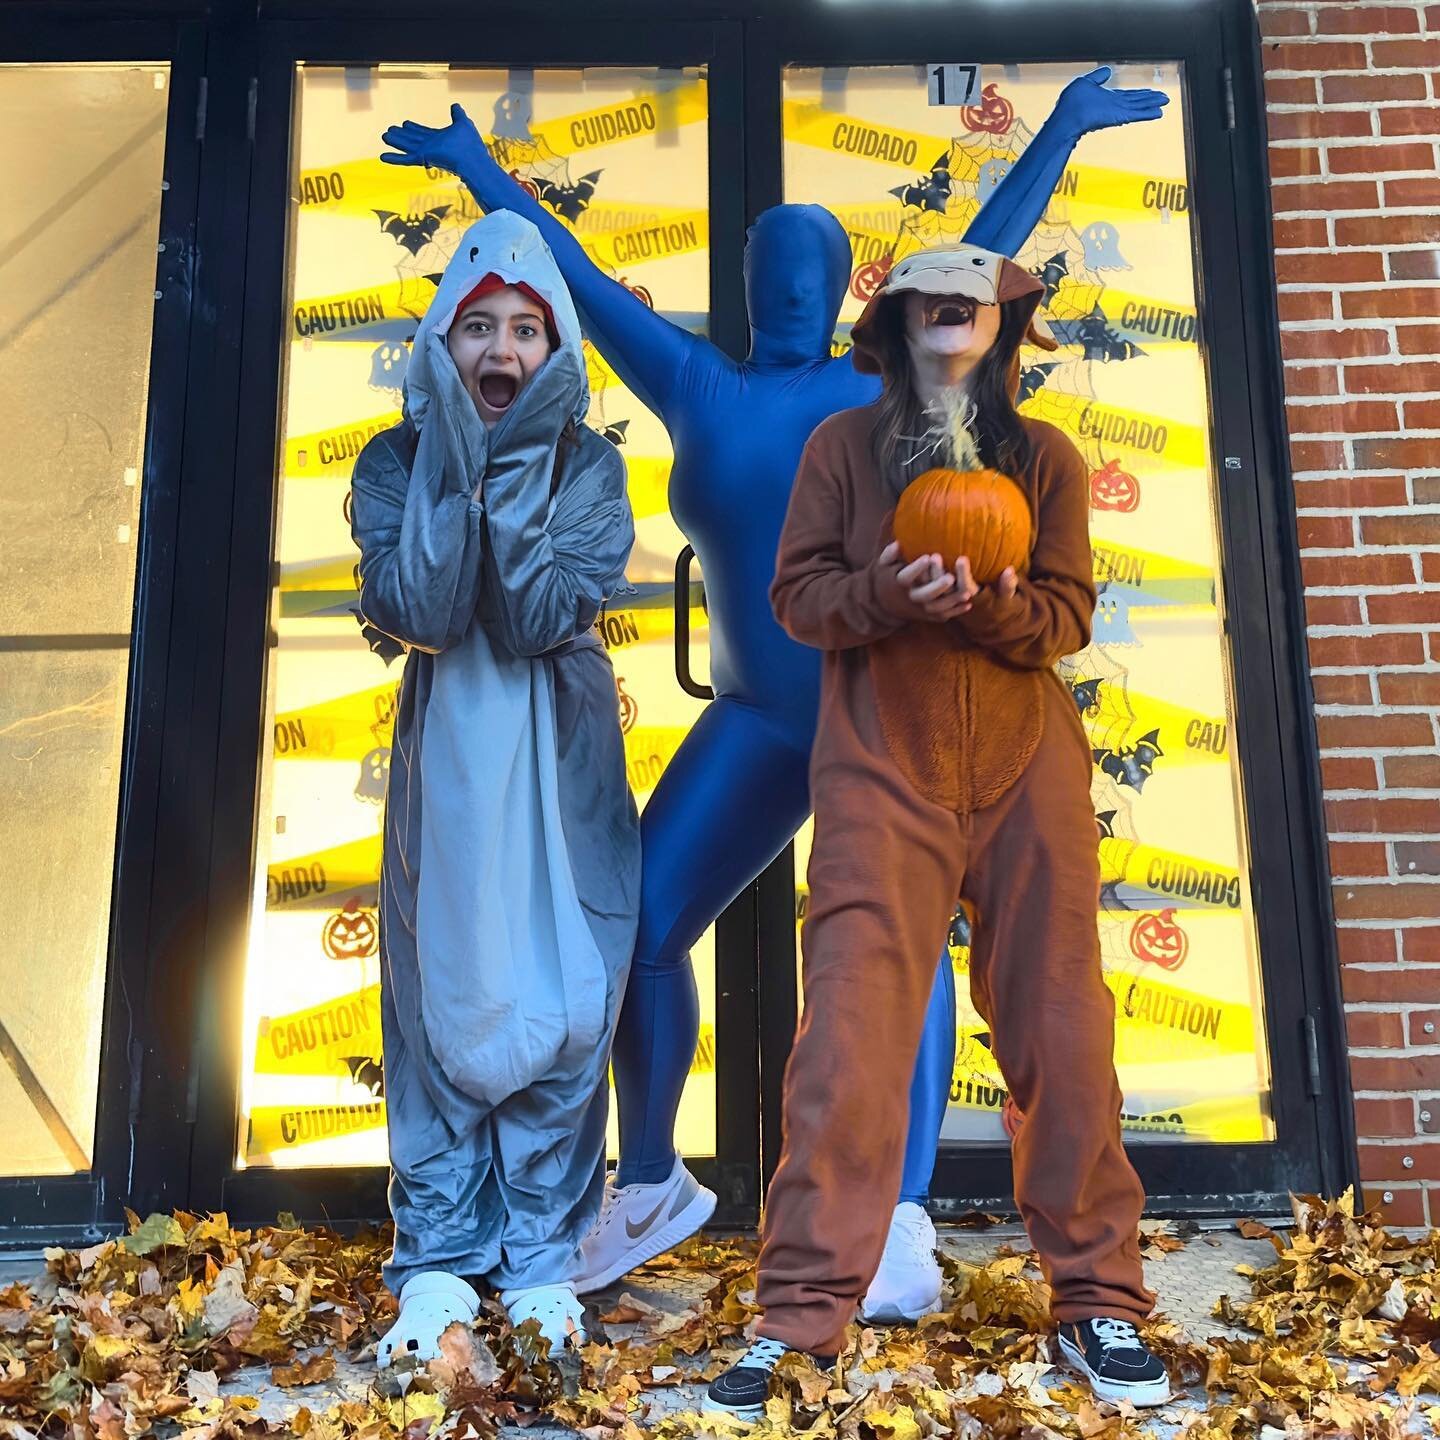 Happy Halloween from BOO&hellip;Theatre! Enjoy our door decor brought to you by Adisson, Nicole and Nadia! #halloween